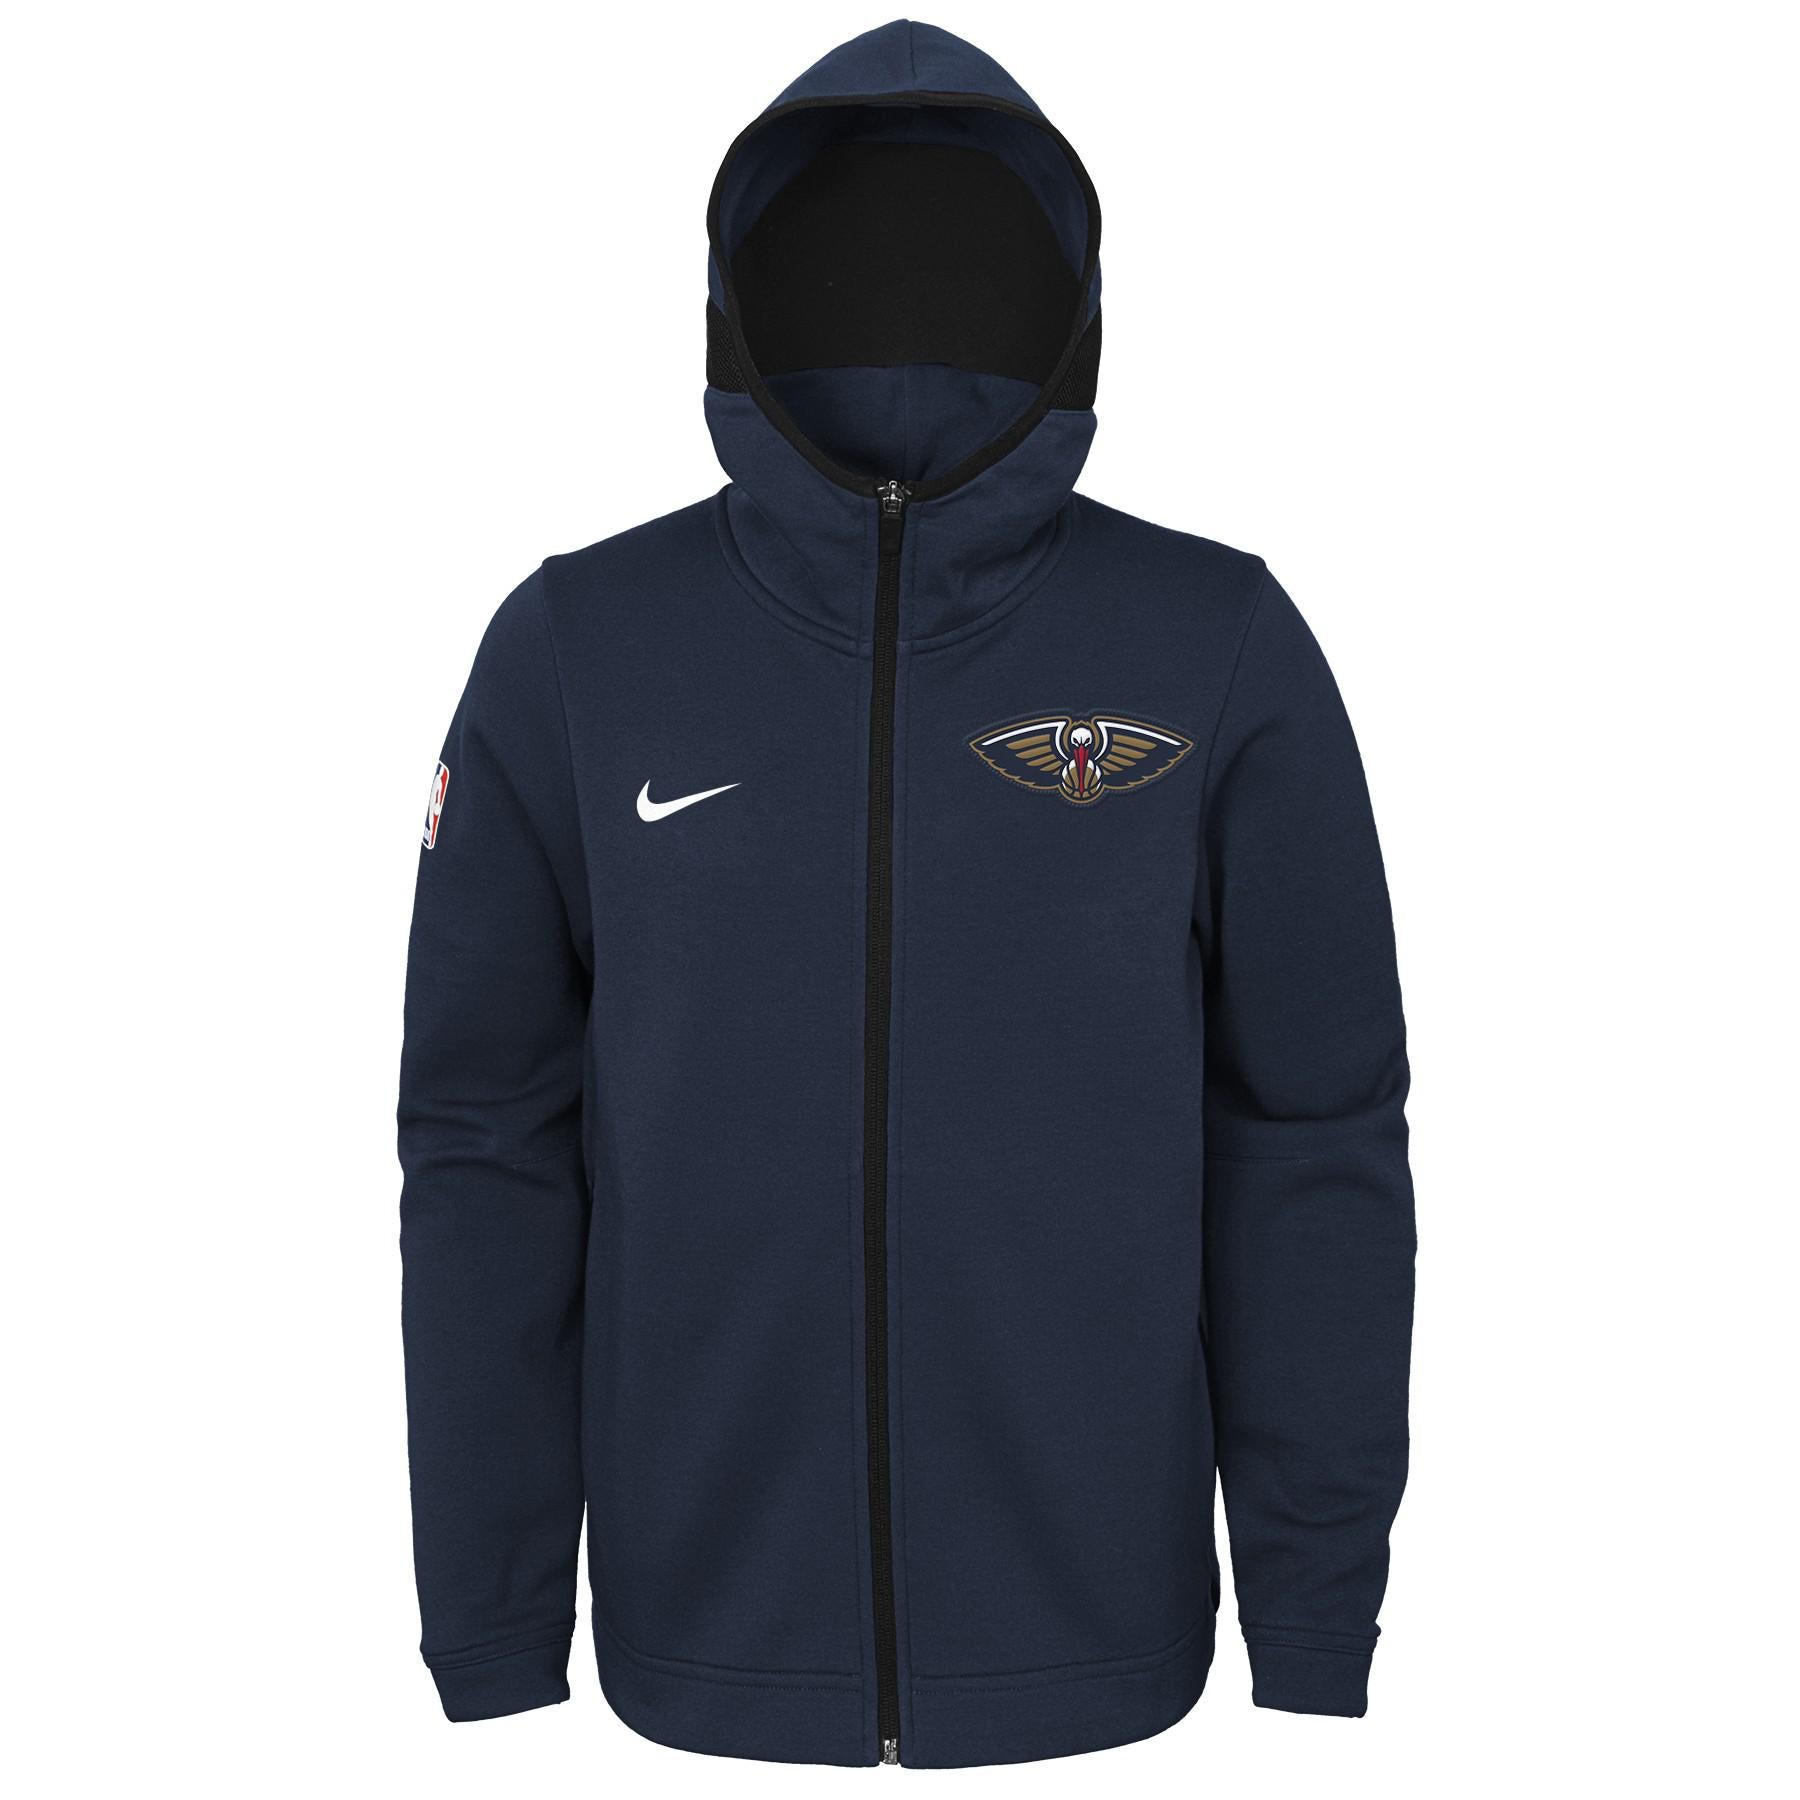 Nike Youth New Orleans Pelicans Showtime Full-Zip Performance Jacket